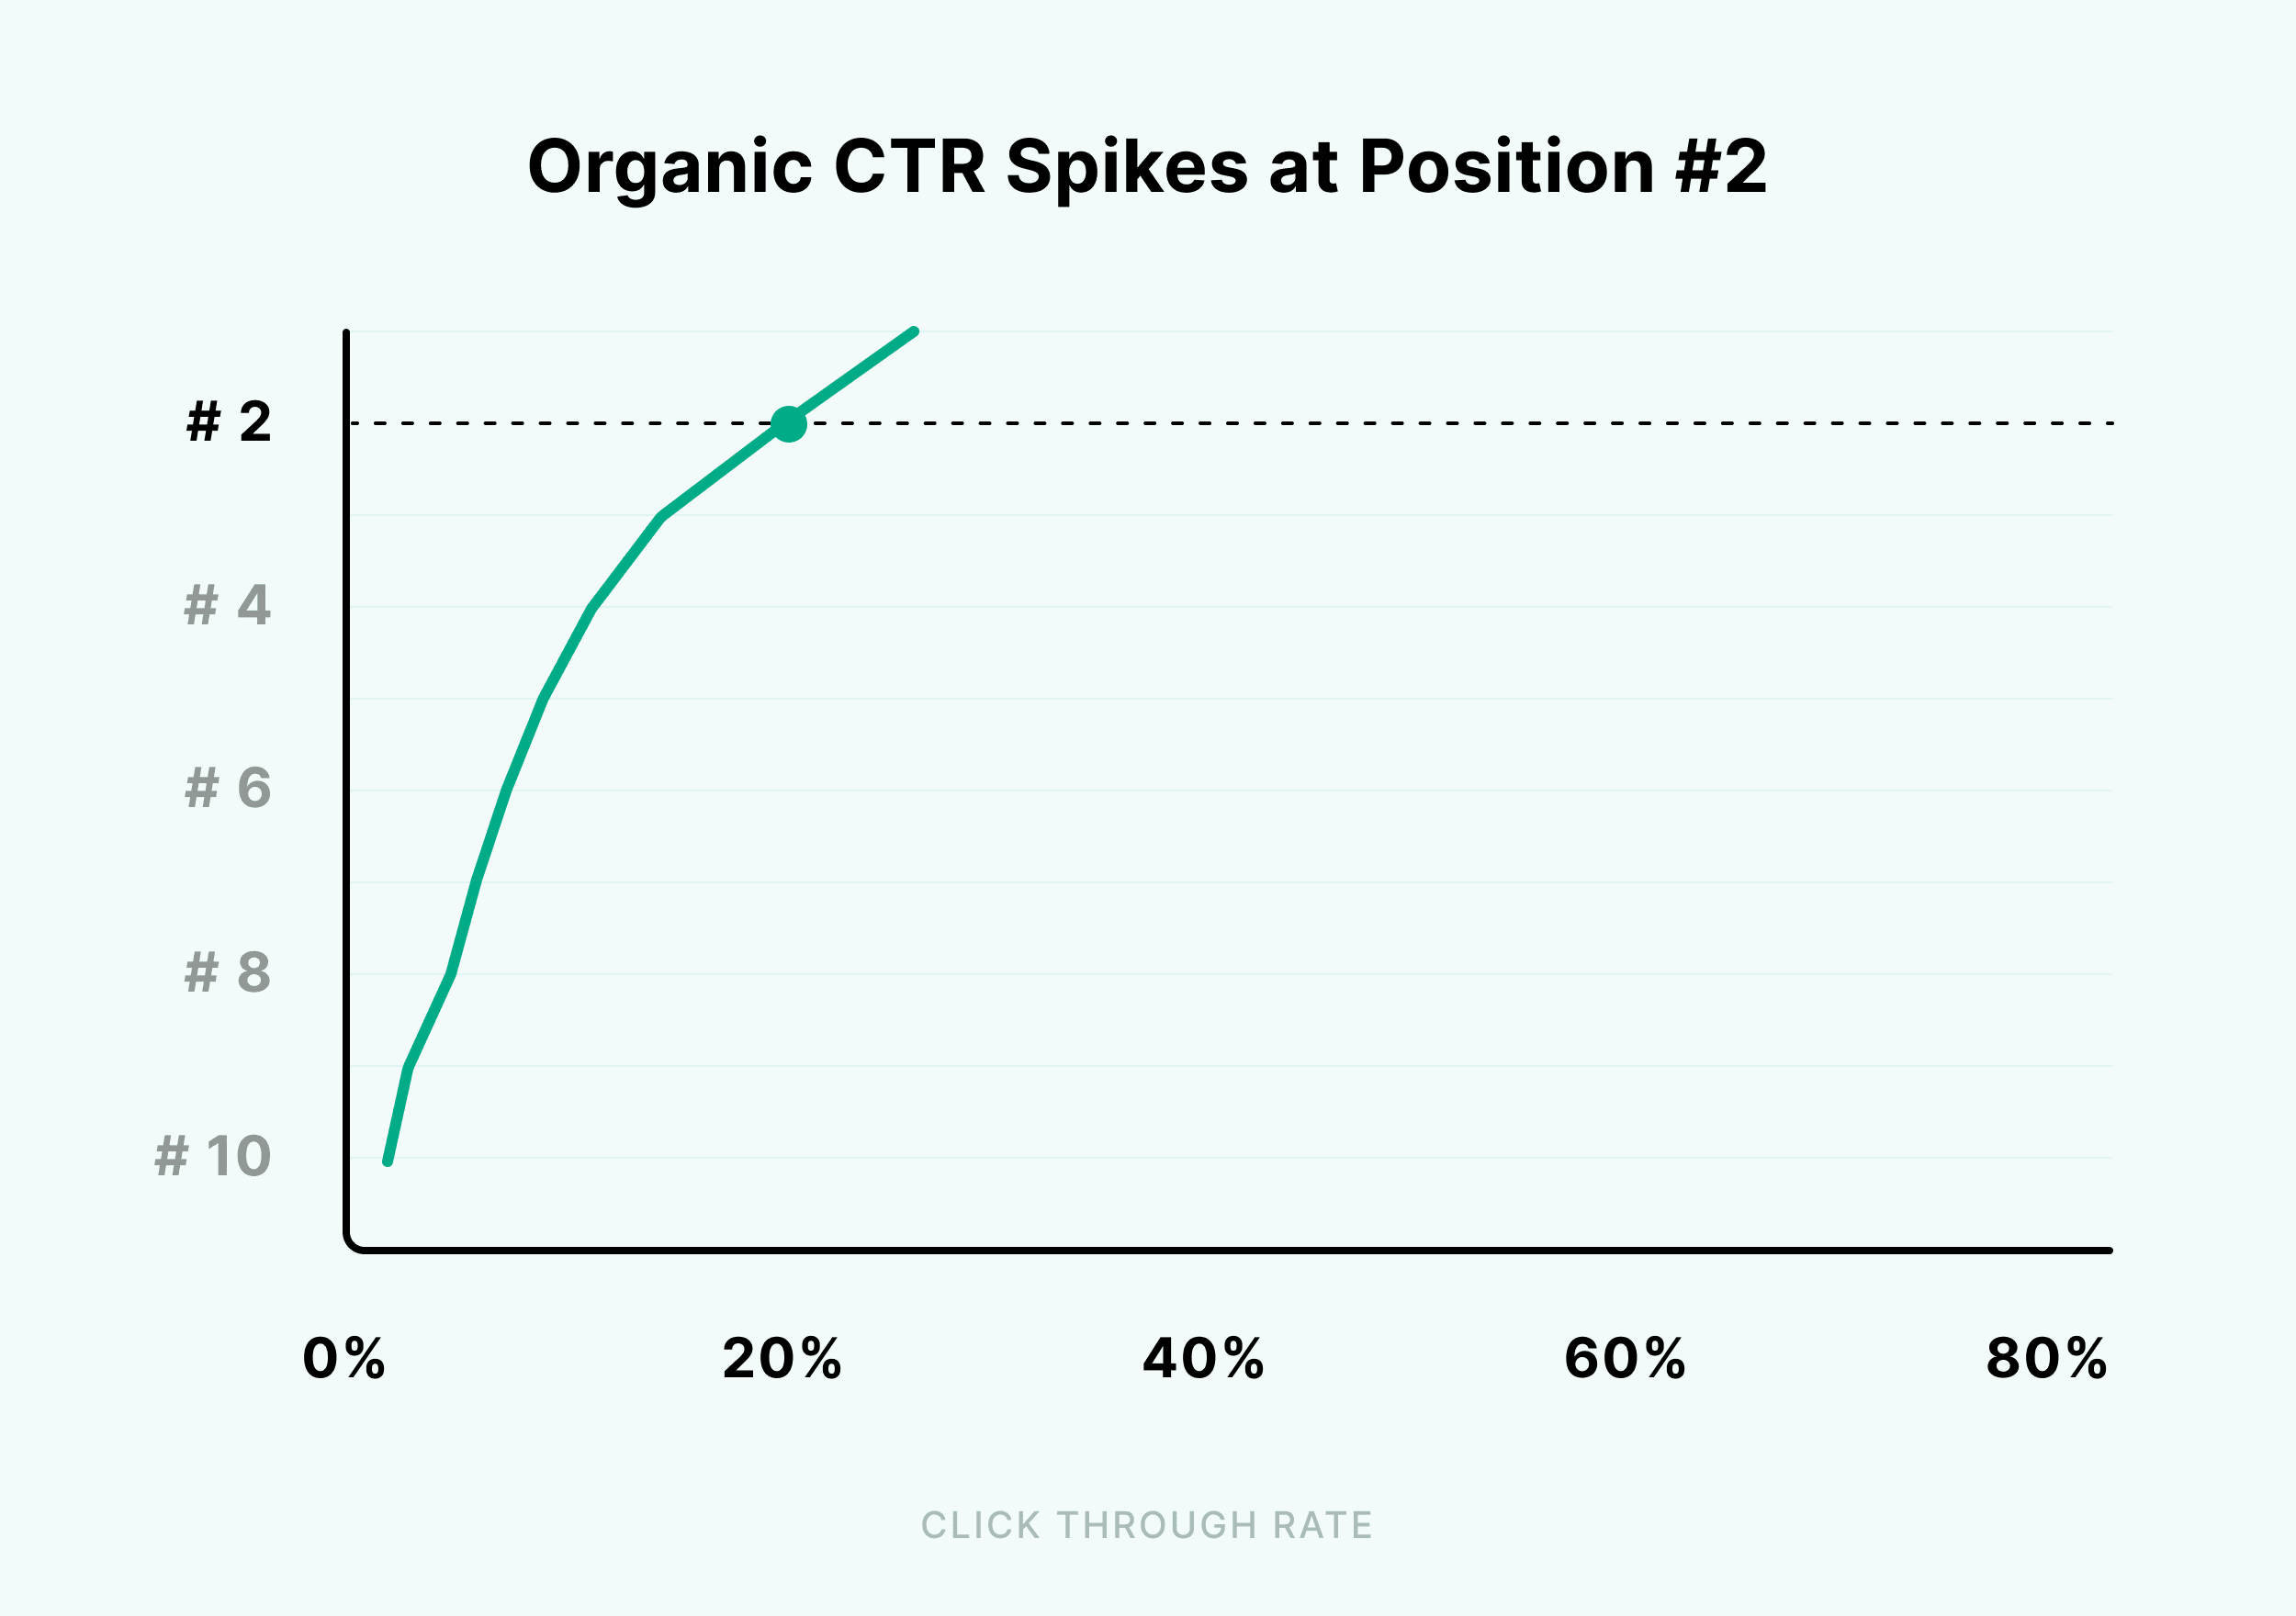 Organic CTR spikes at position #2